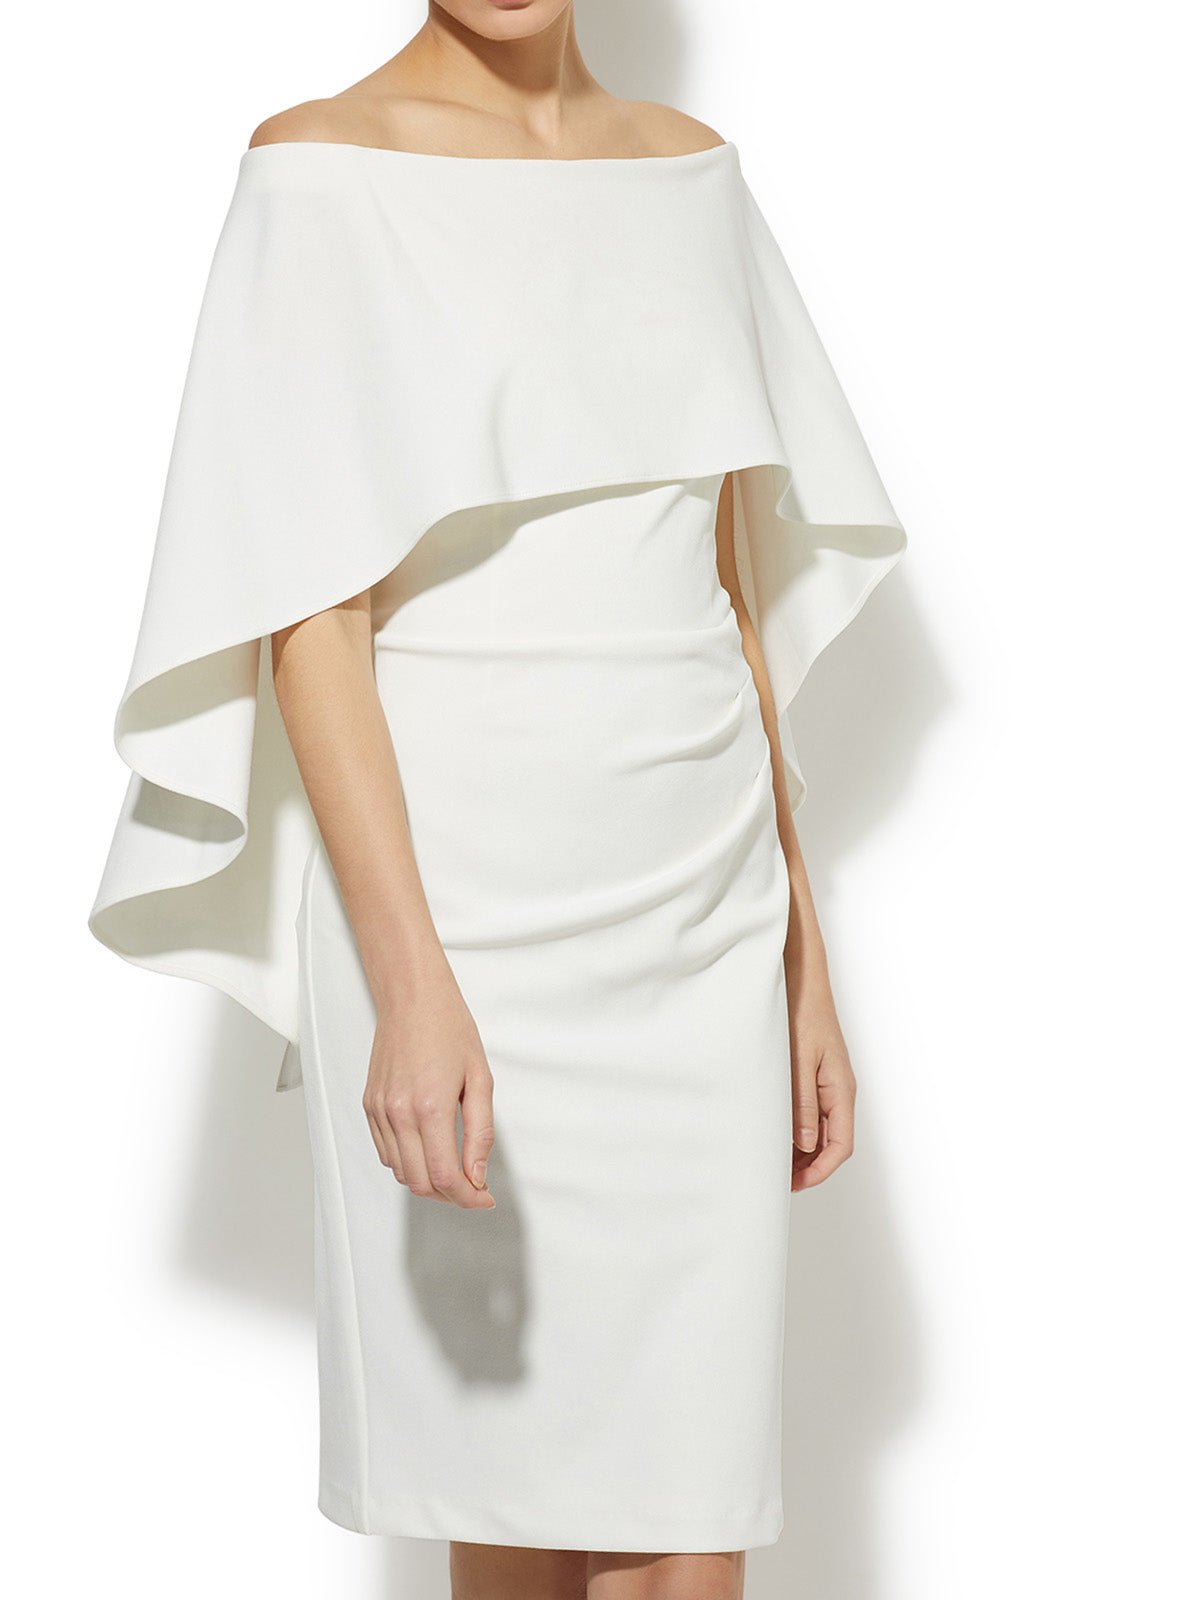 Aerin Ivory Crepe Dress by Montique